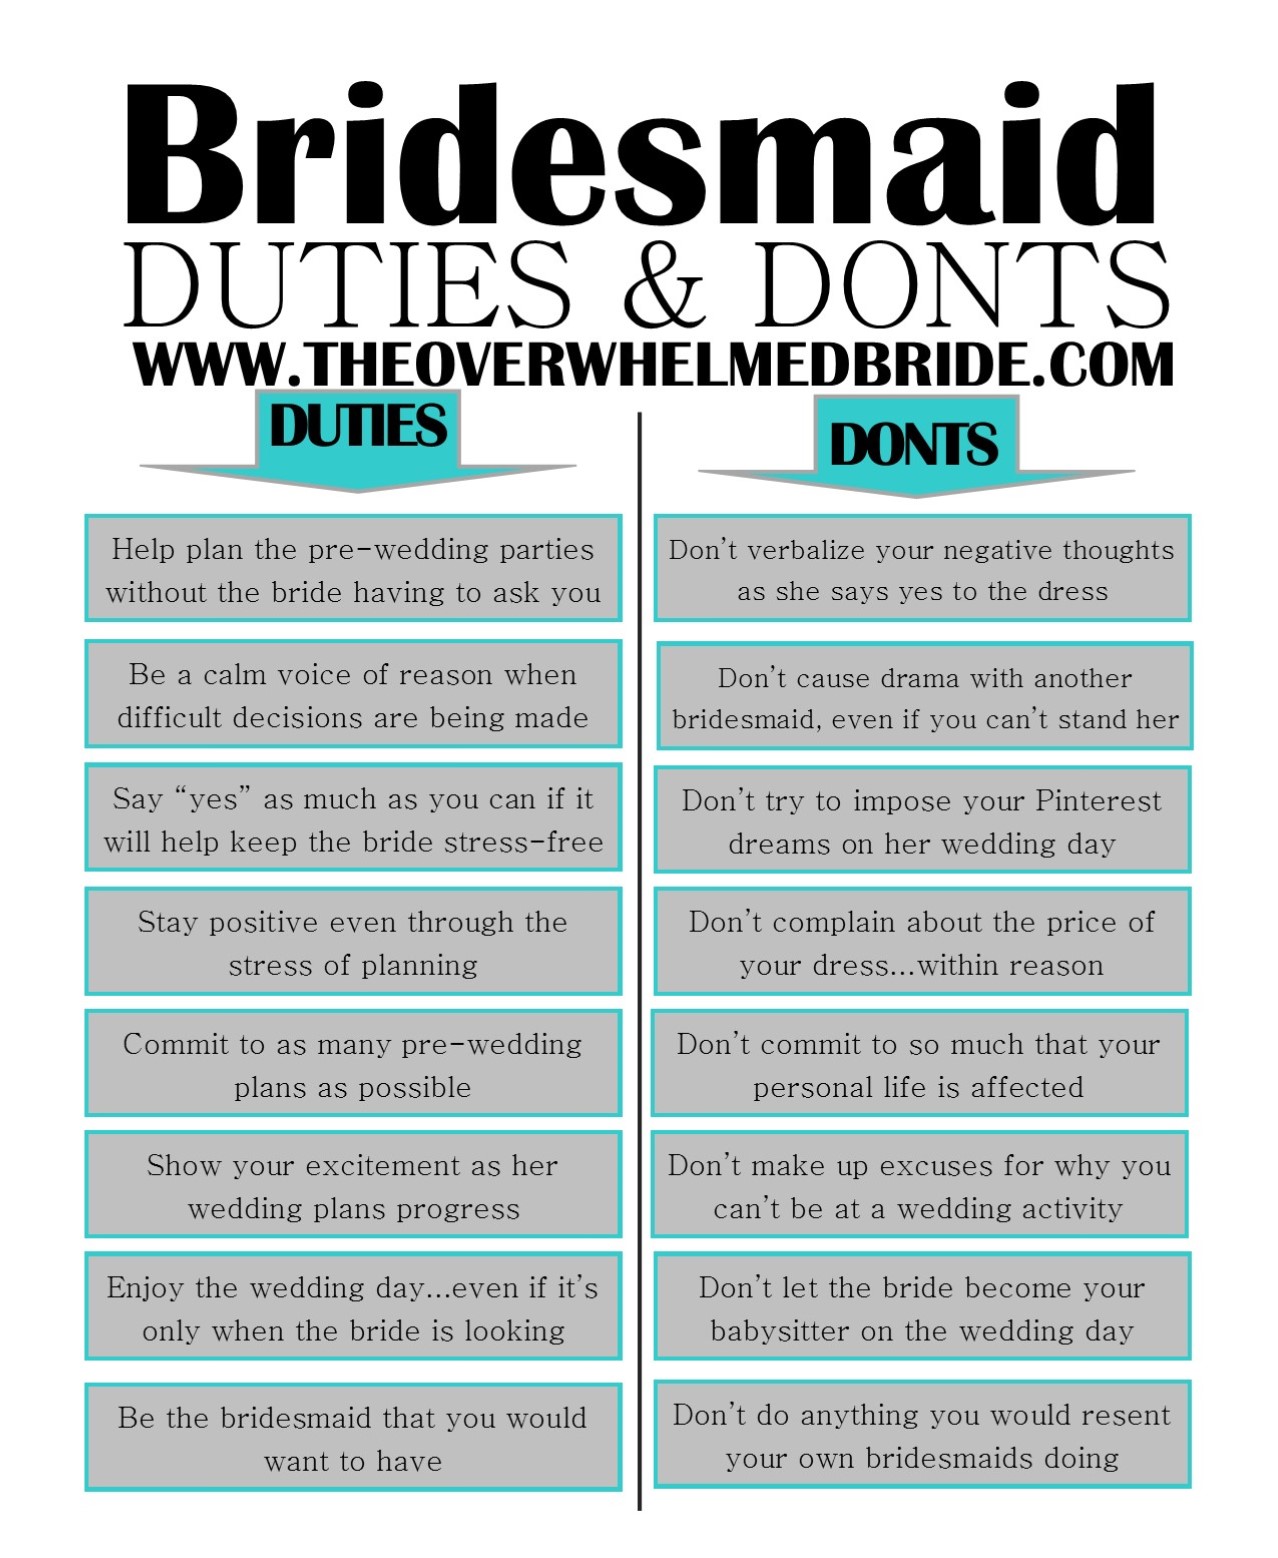 sunday-s-most-loved-bridesmaid-duties-don-ts-the-overwhelmed